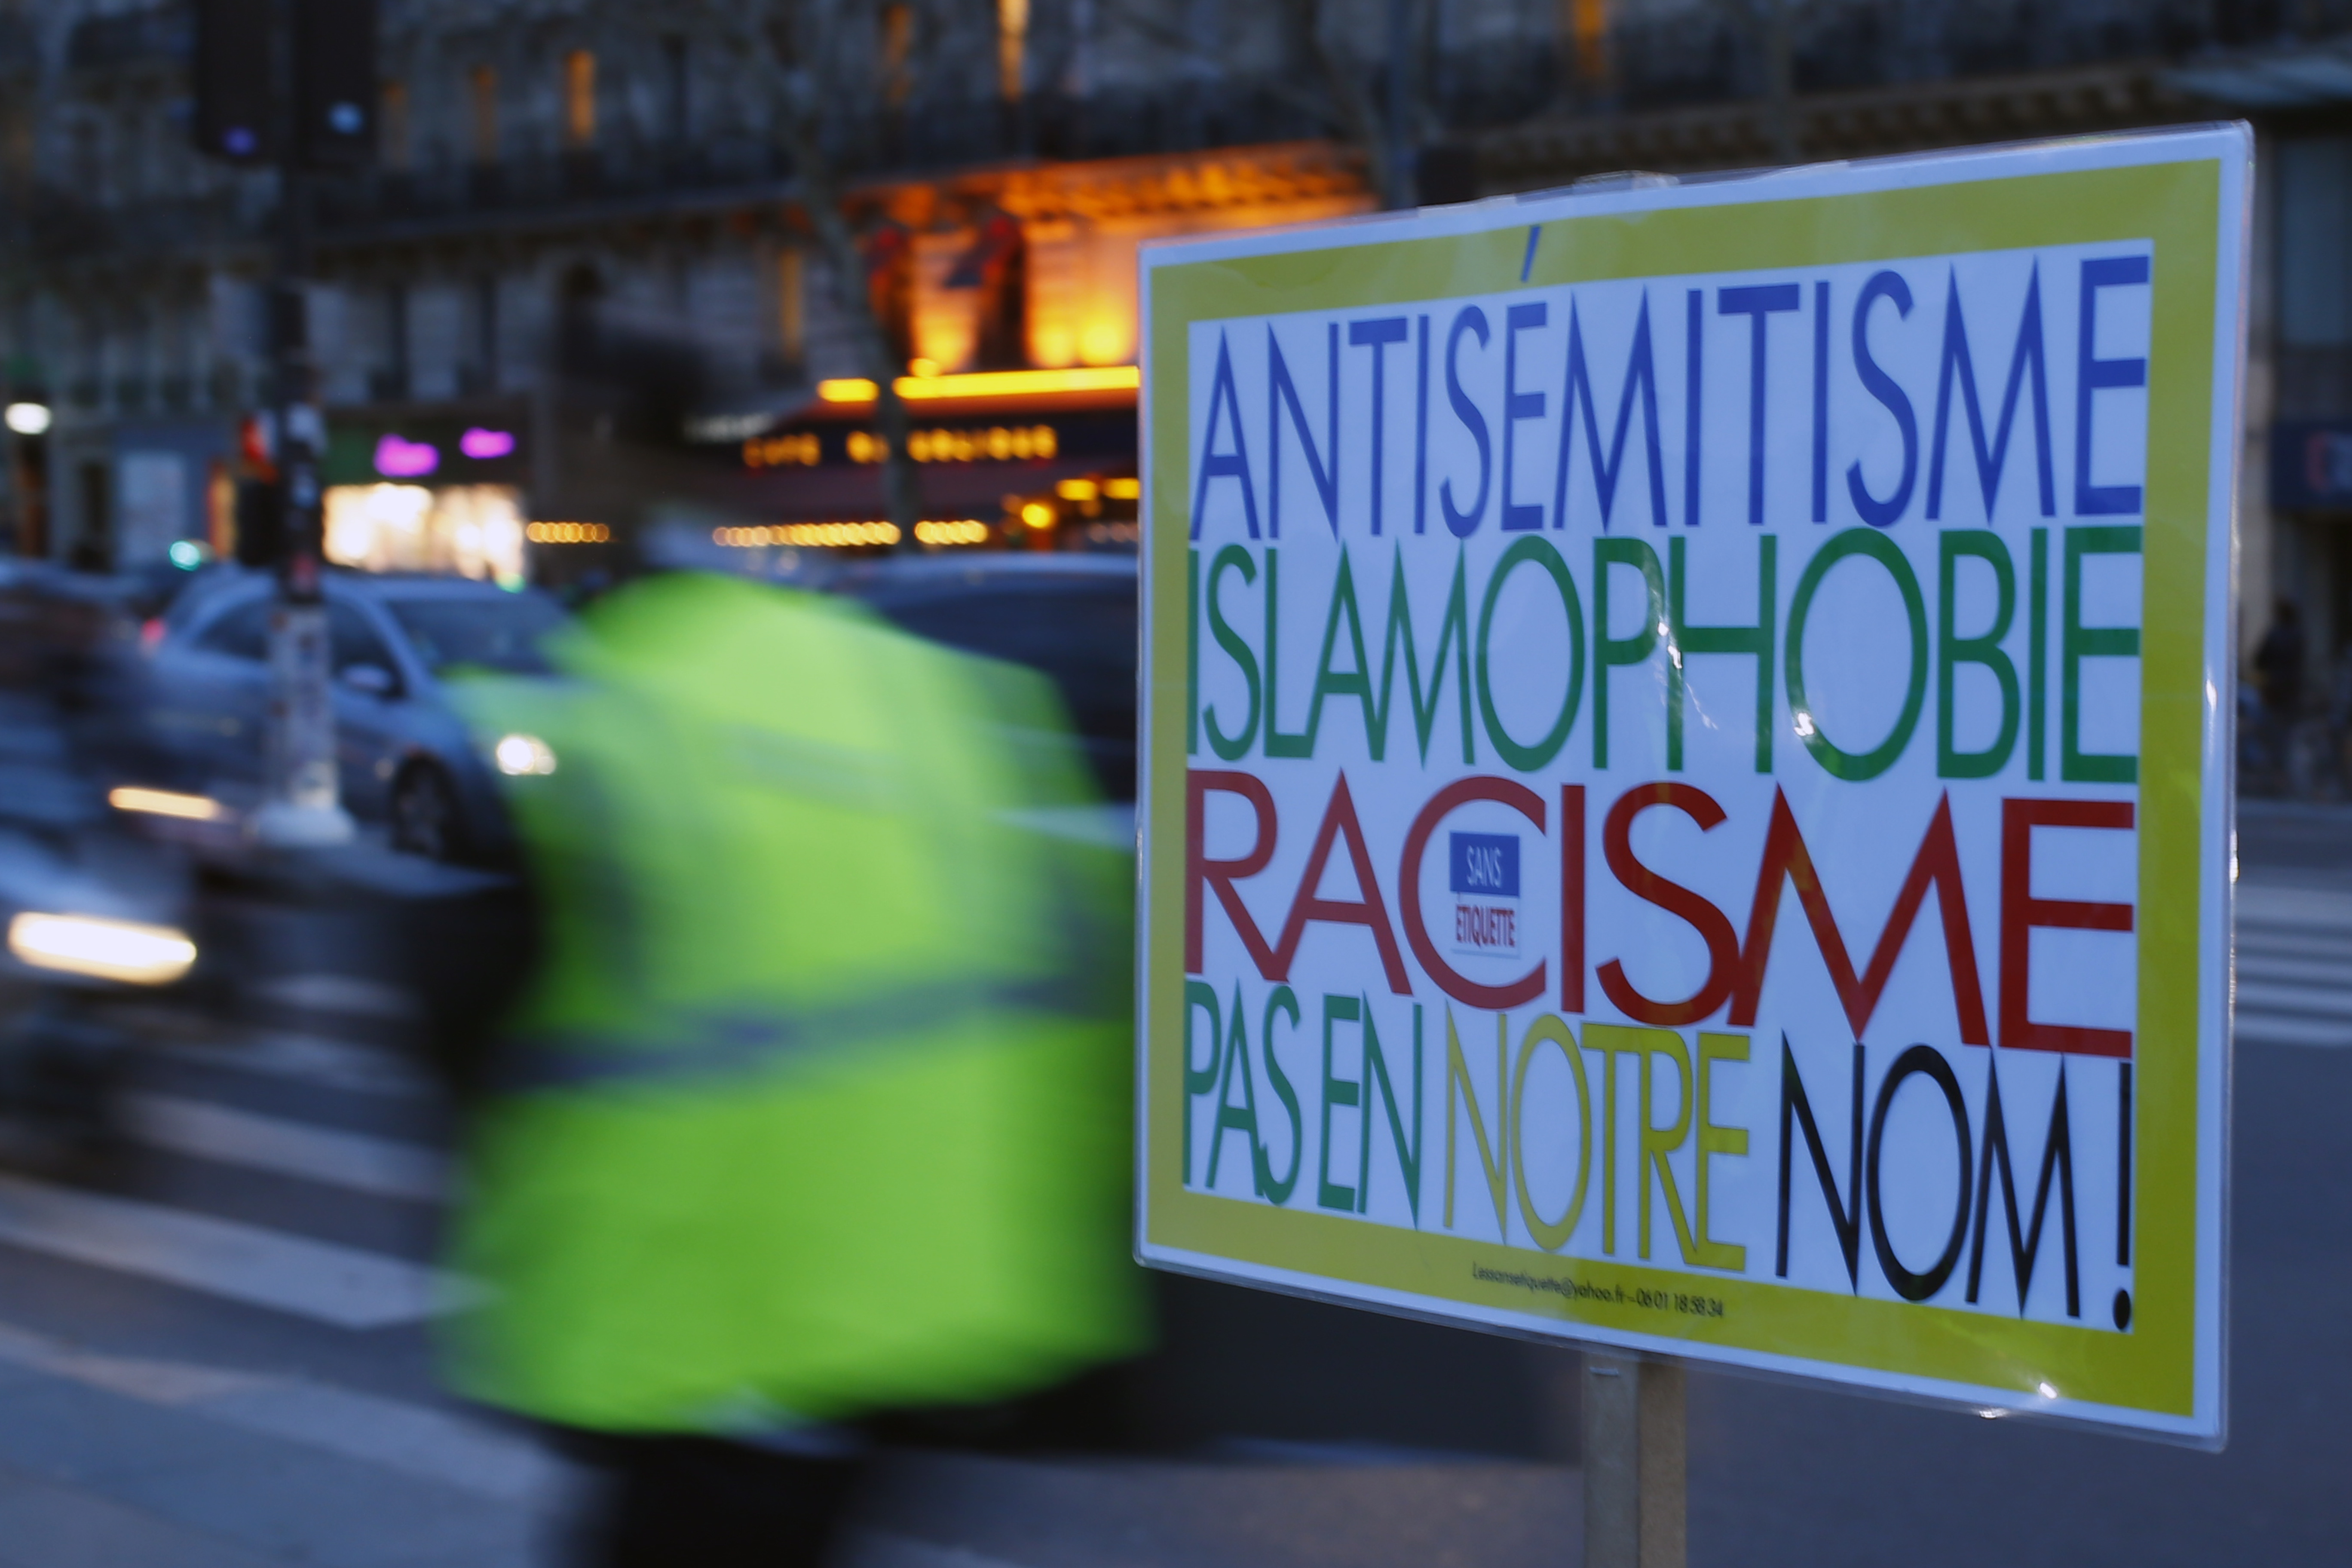 A poster reading "Anti-Semitism, Islamophobia, Racism, Not in Our Name" during a gathering decrying anti-Semitism at Place de la Republique in Paris, Monday, Feb. 18, 2019 amid an upsurge in anti-Semitism in France. It reached a climax last weekend with a torrent of hate speech directed at a distinguished philosopher during a march of yellow vest protesters, adding to questions about the radicalized fringes of the movement hidden within French society and troubling the nation. (AP Photo/Francois Mori)